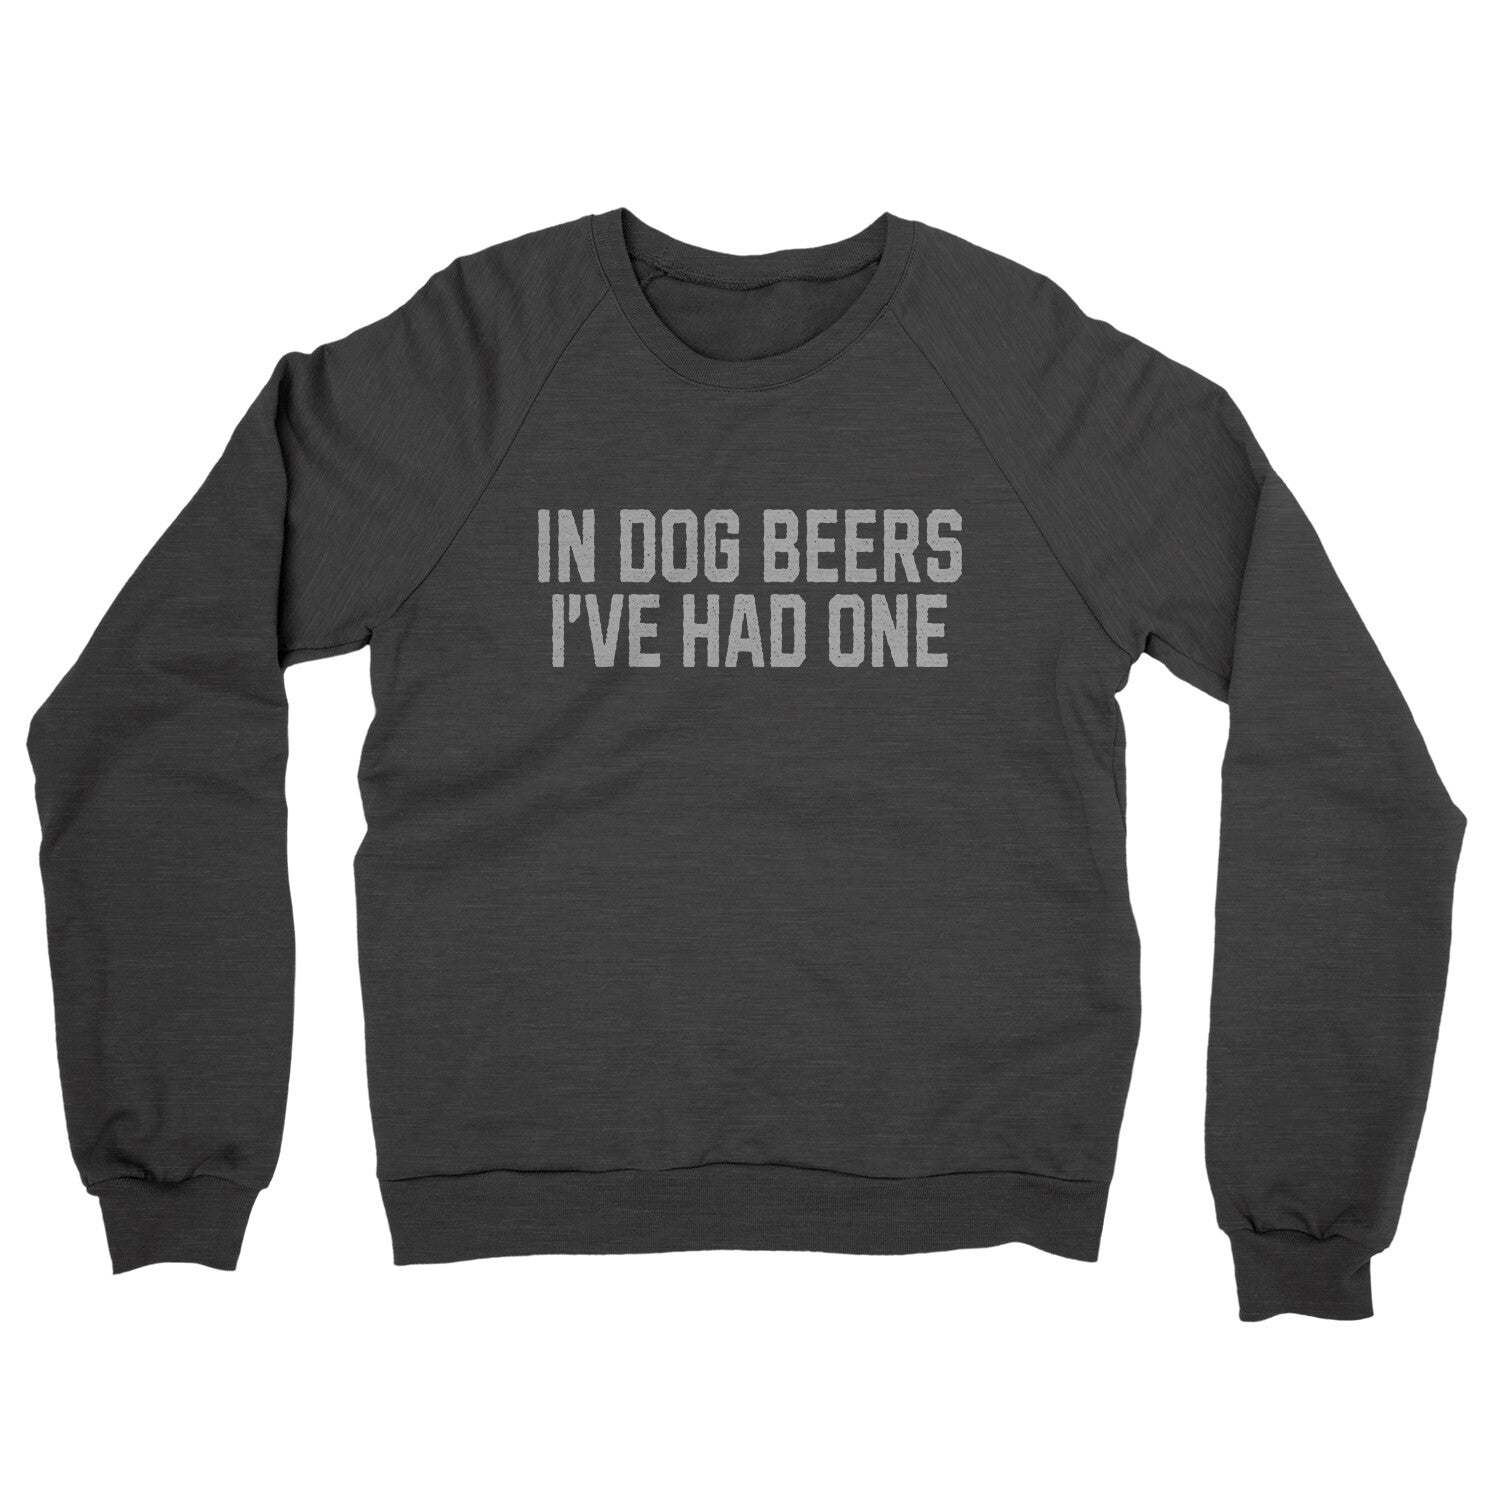 In Dog Beers I've Had One in Charcoal Heather Color